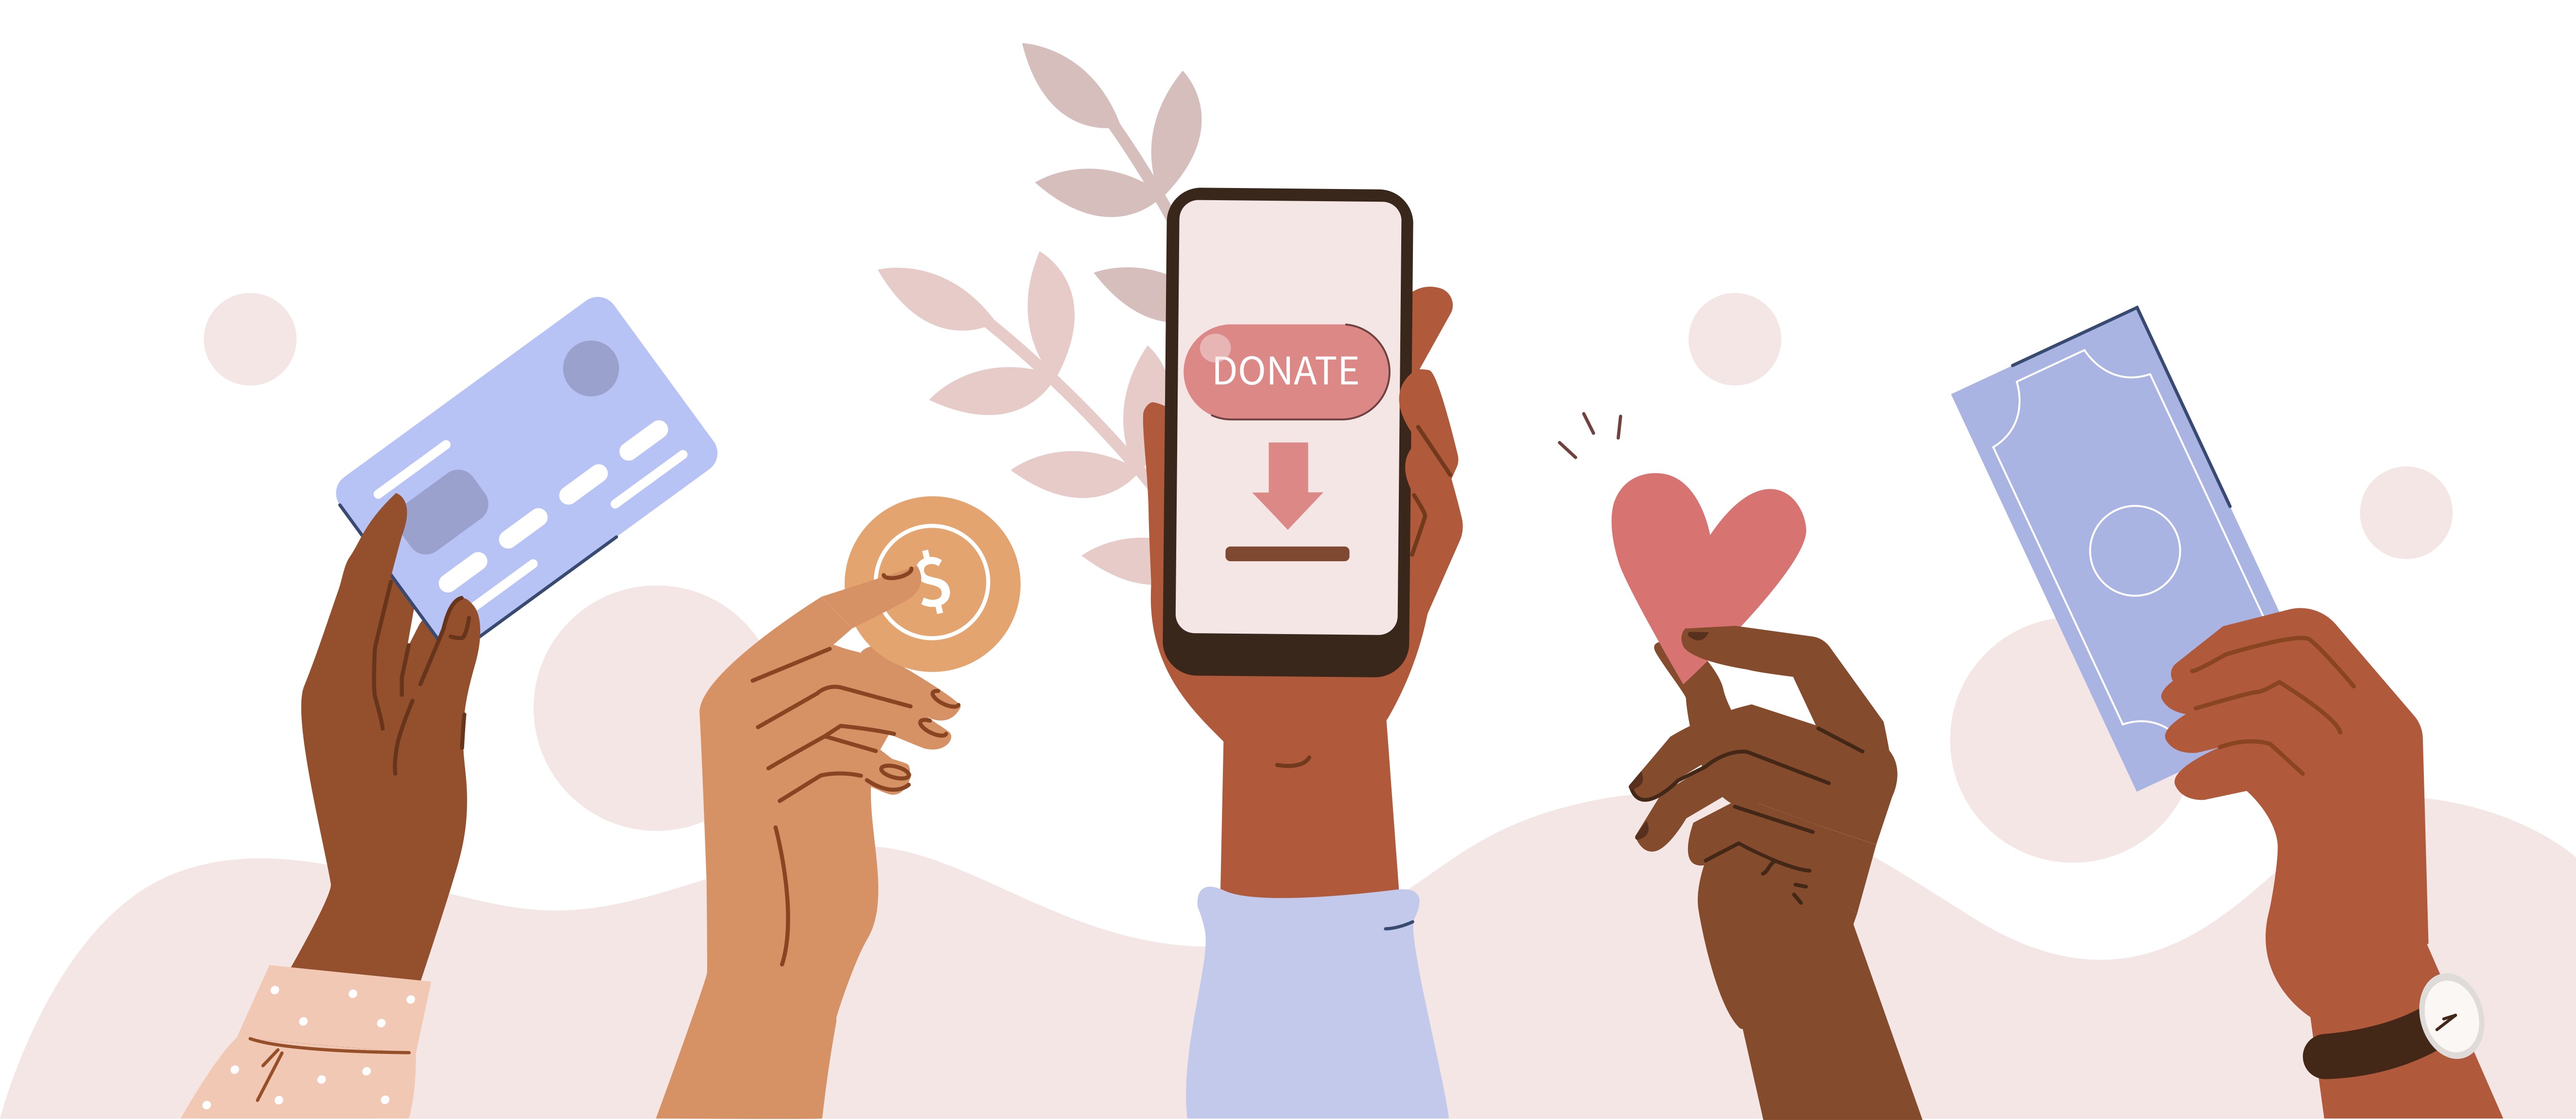 Four hands hold up various forms of currency around a smartphone that shows the word “donate”